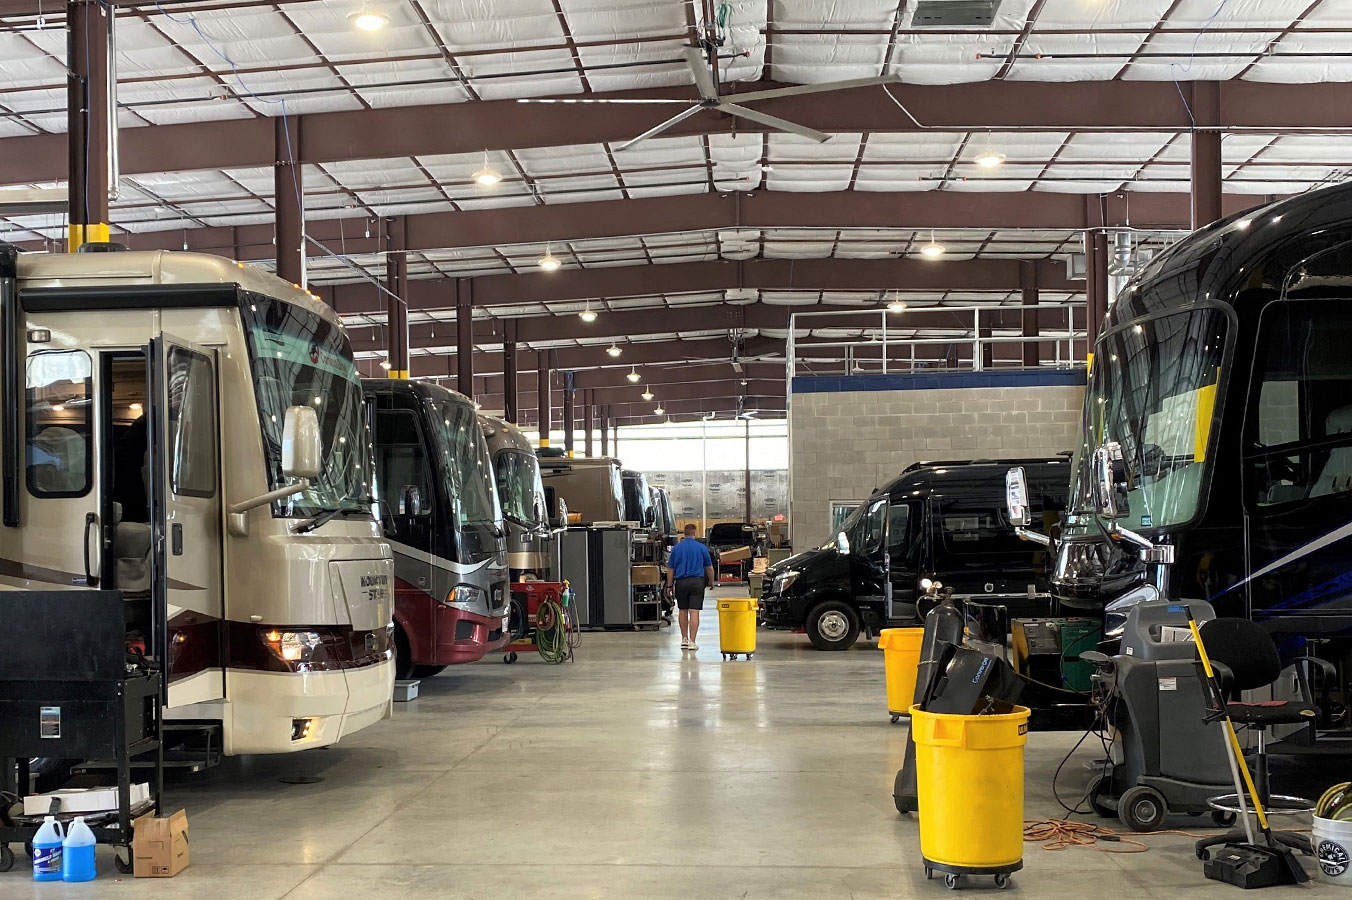 New RV Models getting cleaned up for show